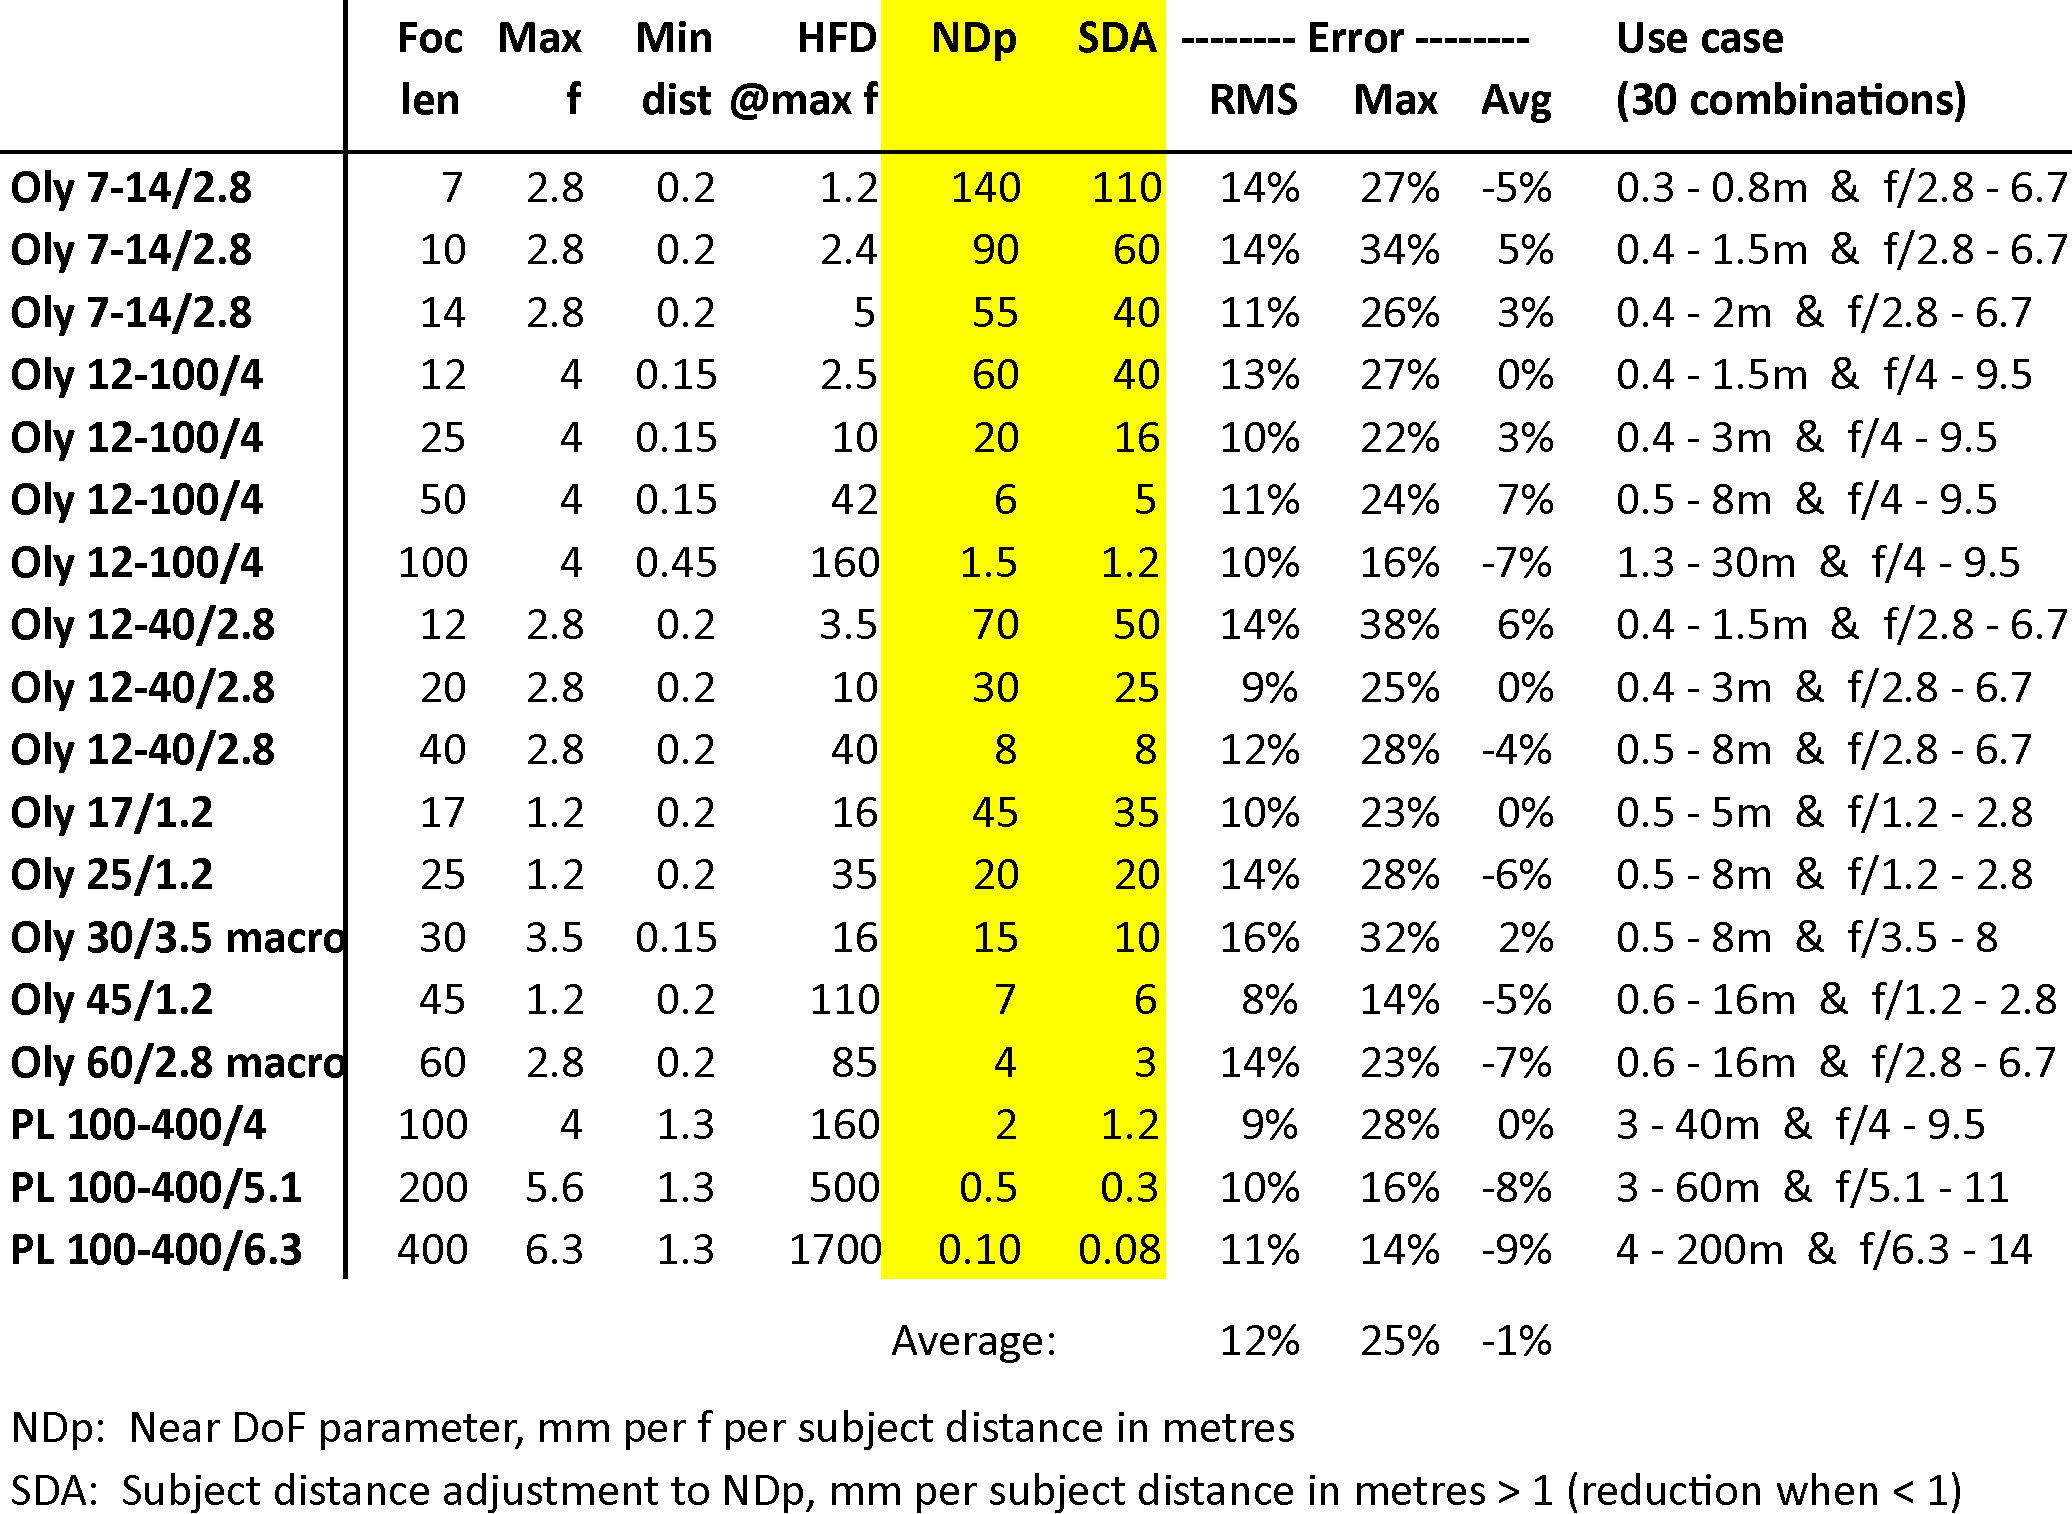 Table of NDp and SDA parameter values